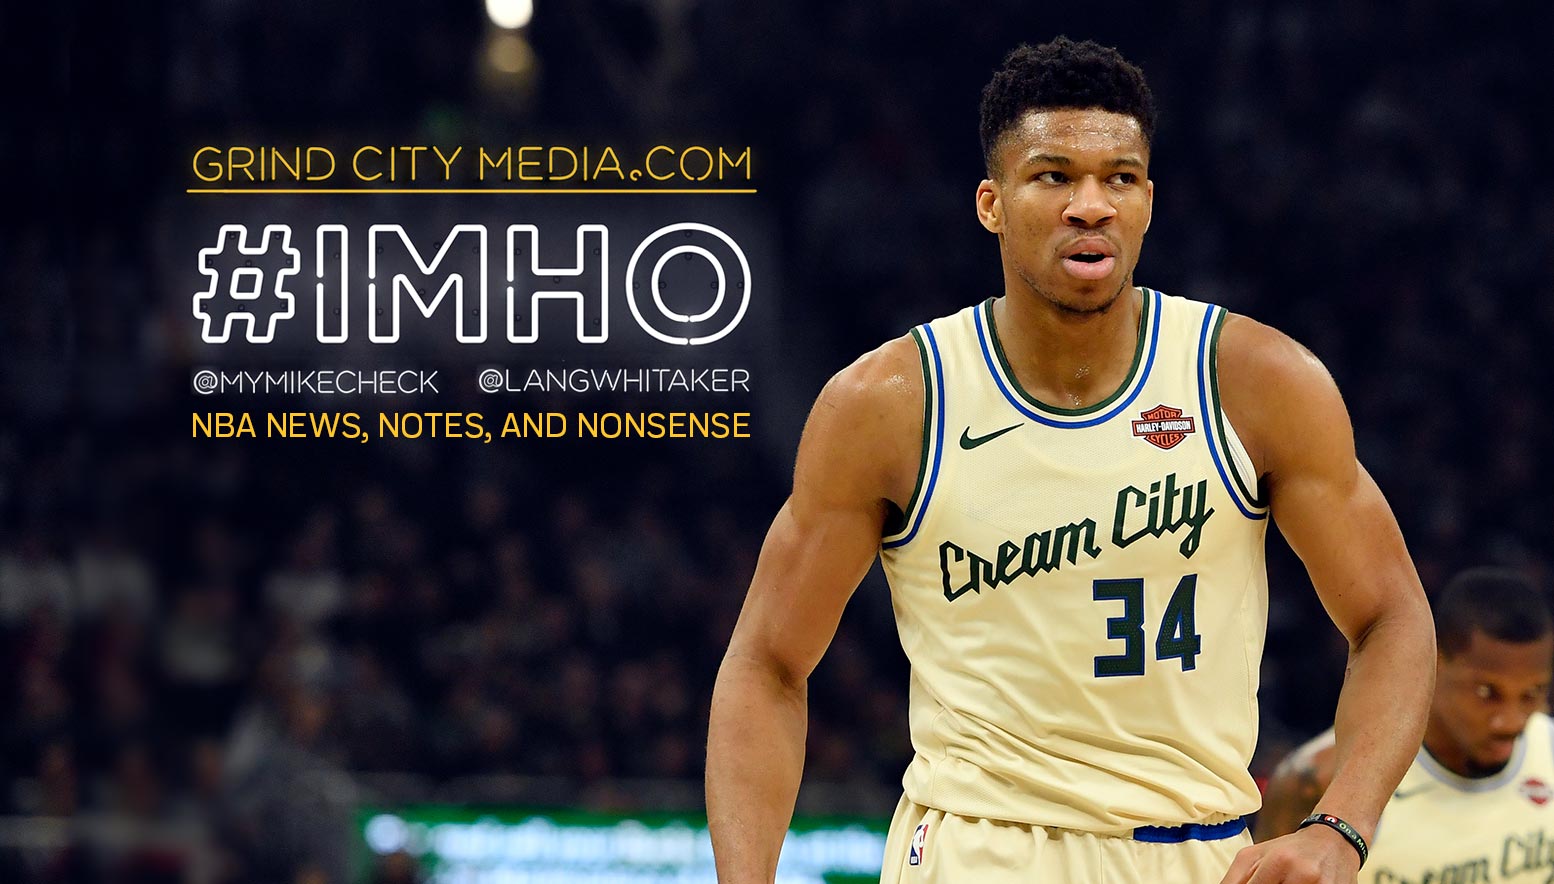 #IMHO: Rebuilding, Giannis the MVP, and Heat Culture